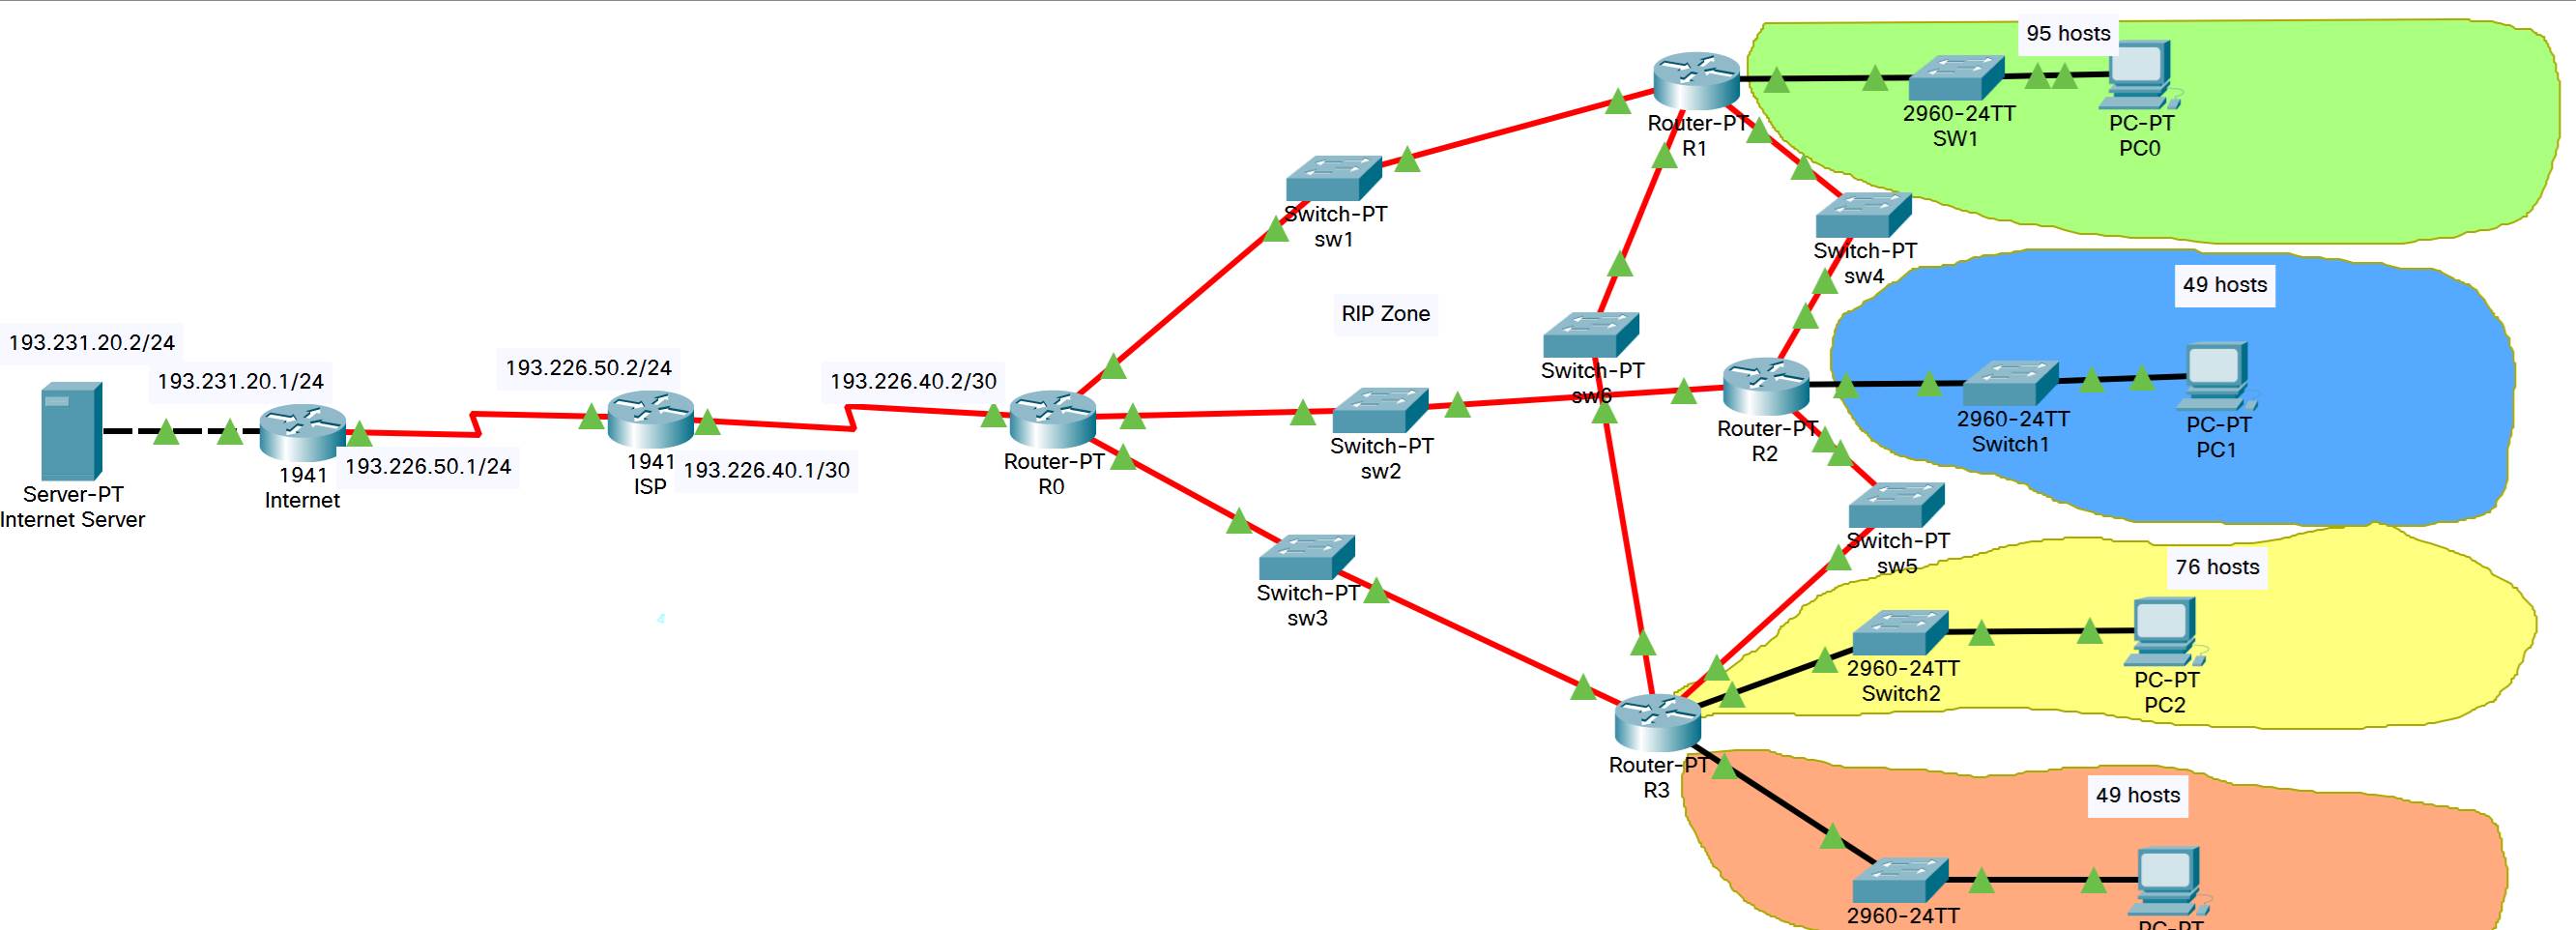 A diagram of a network

Description automatically generated